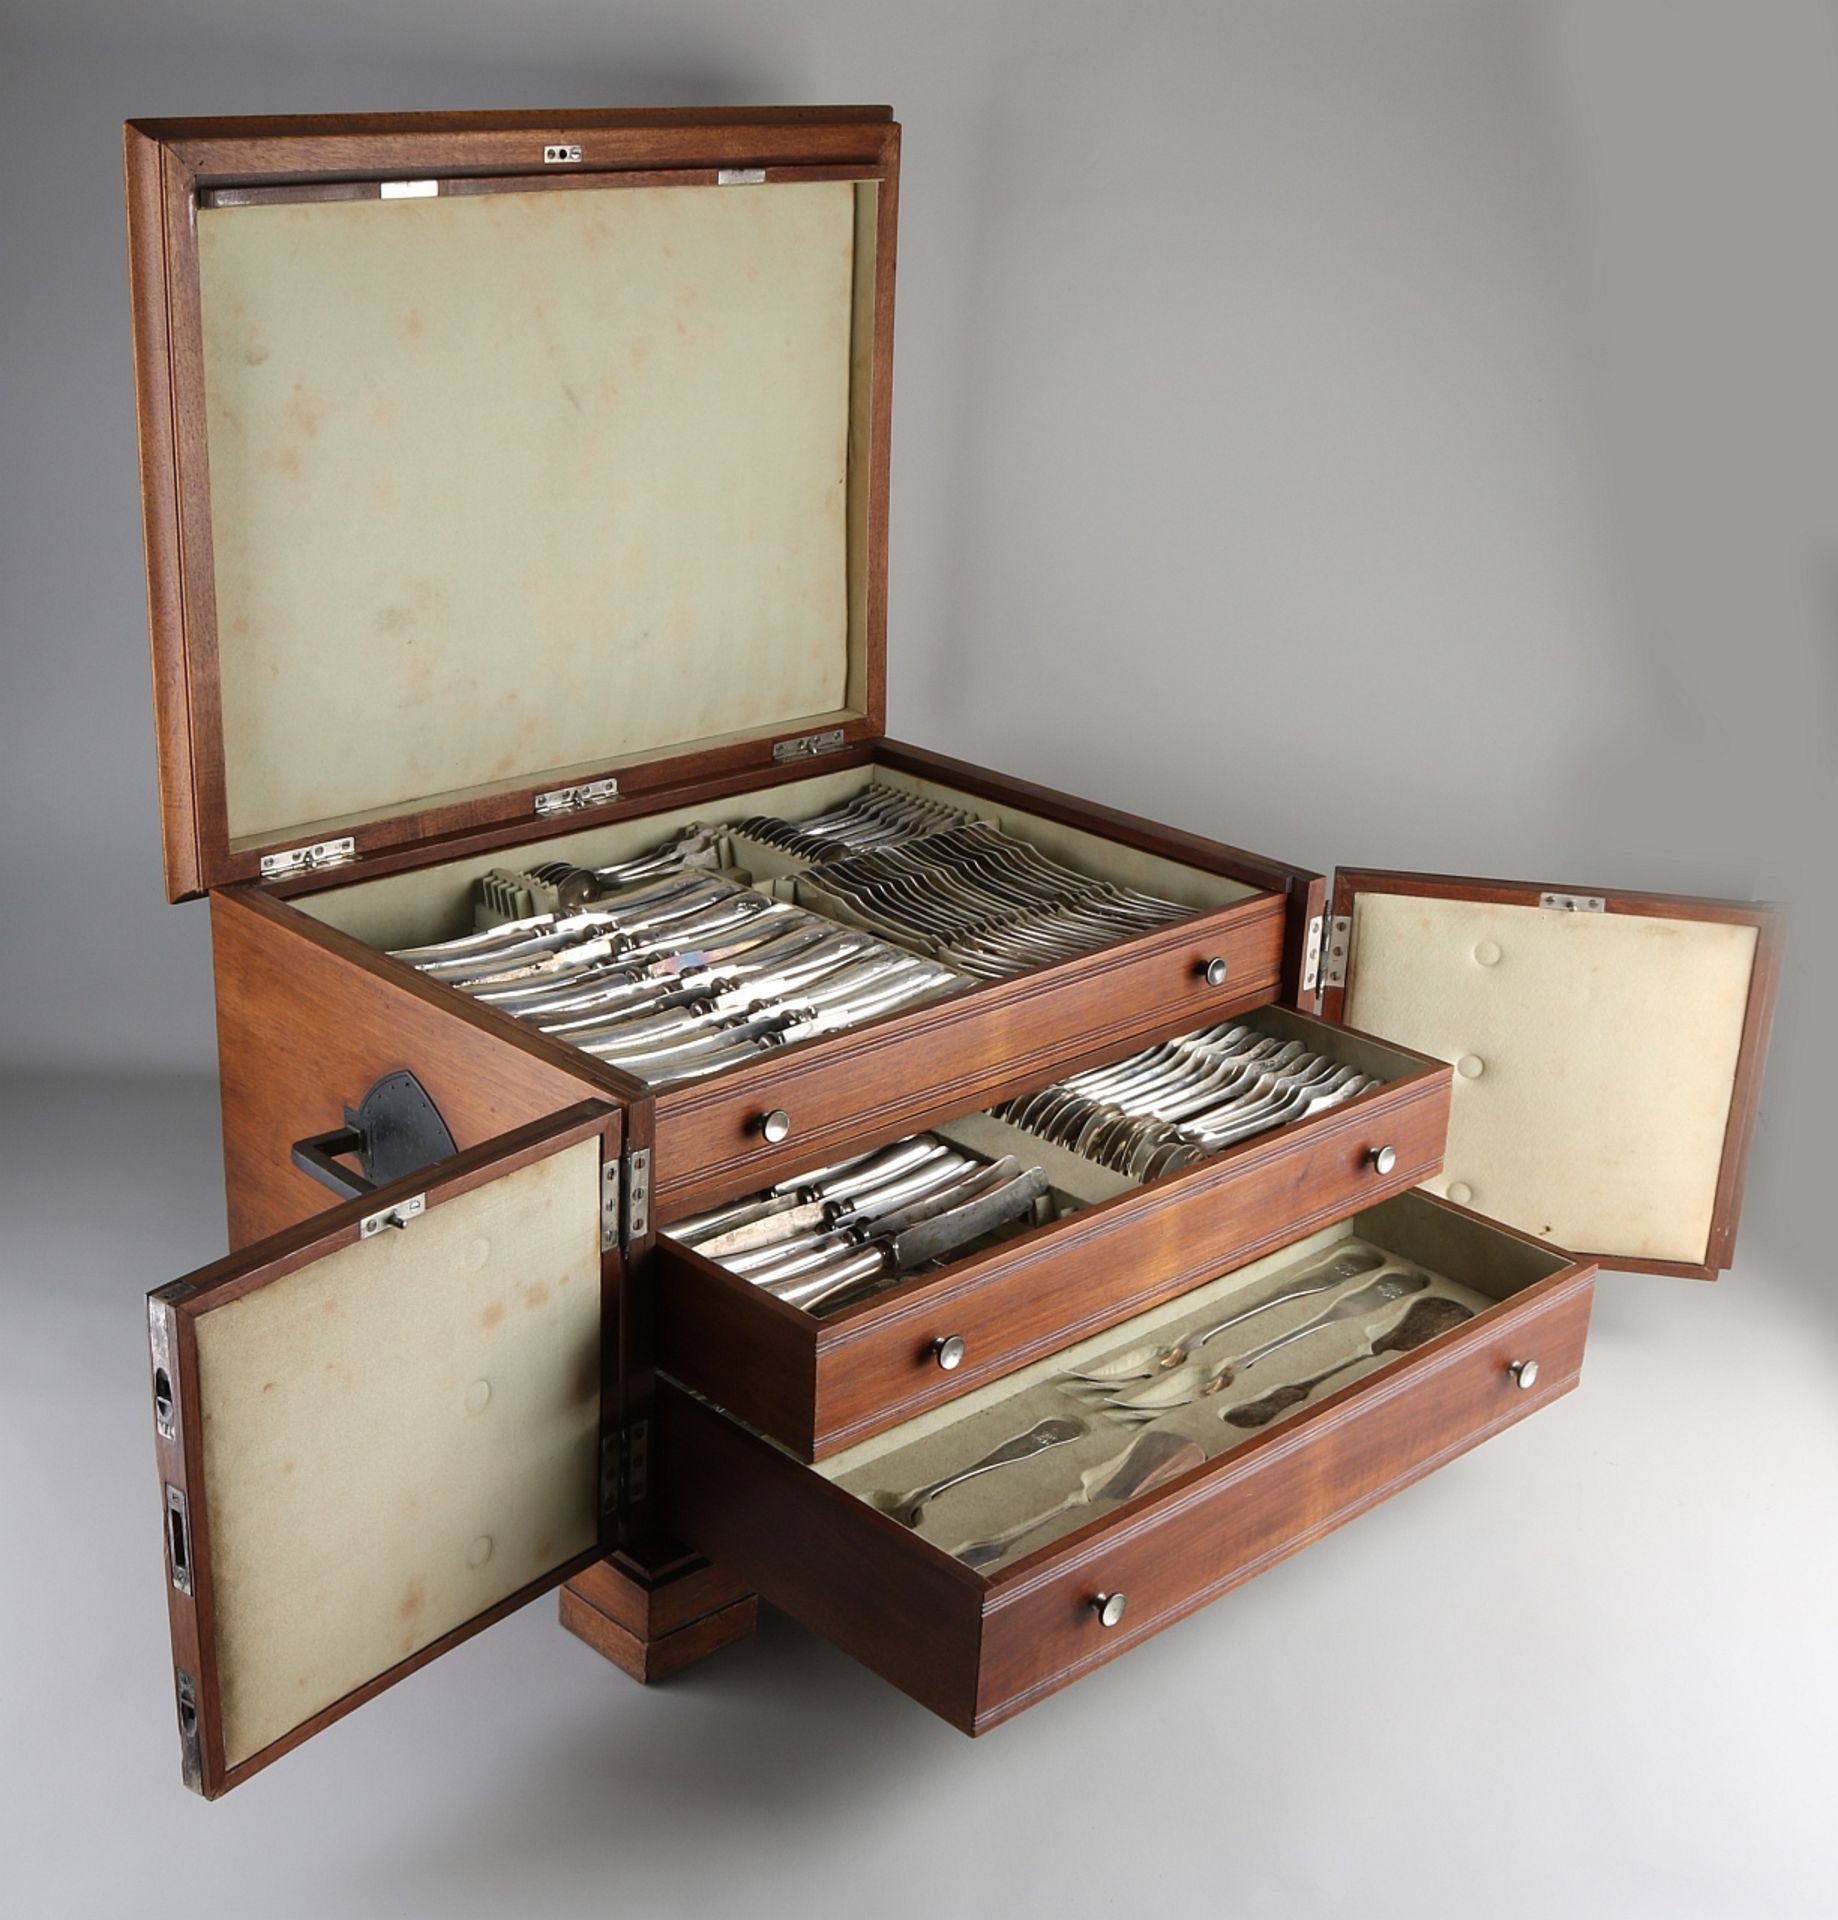 Wooden case with large silver cutlery